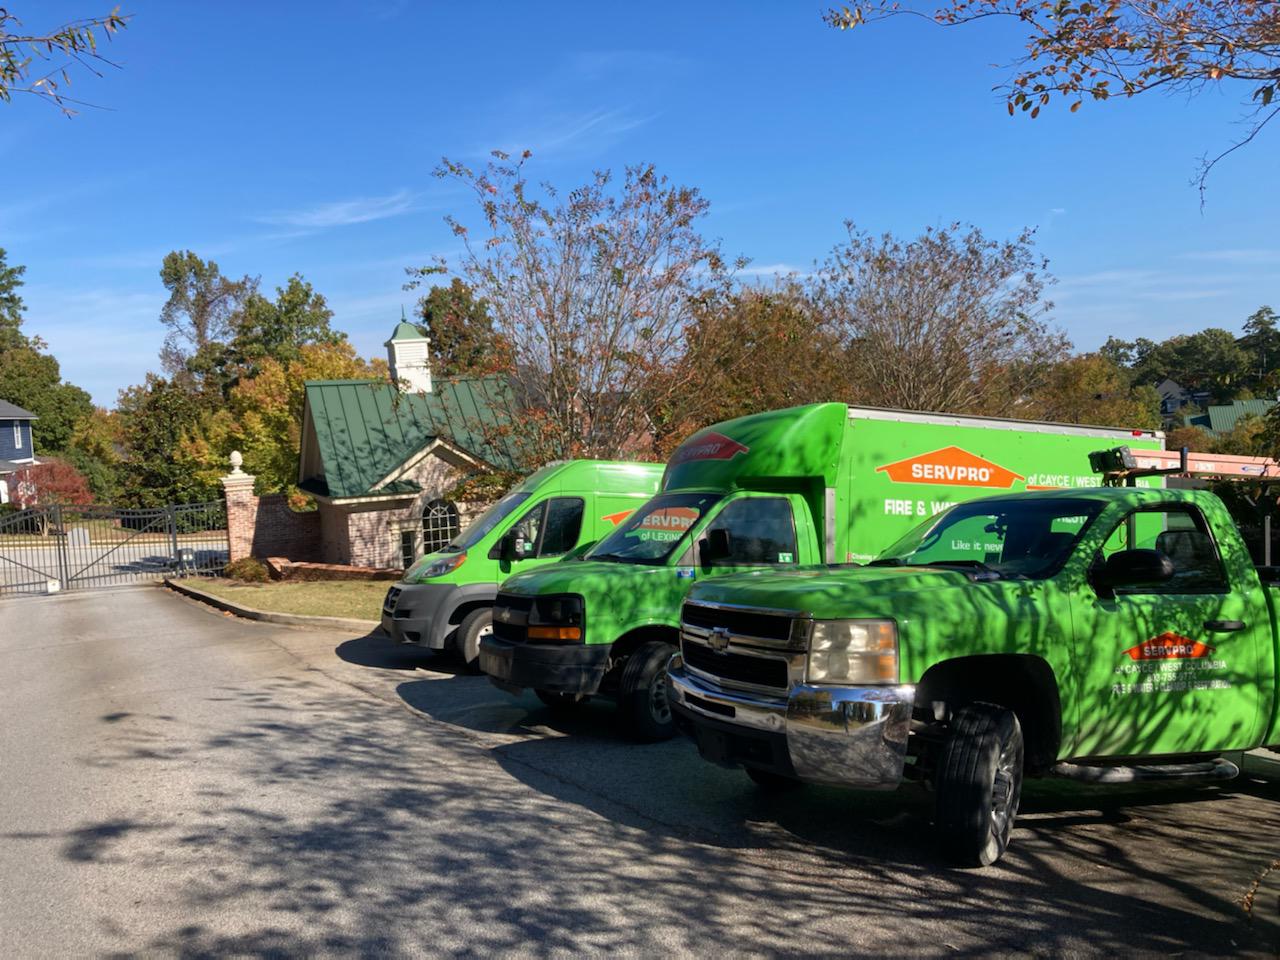 SERVPRO of Lexington & SERVPRO of Cayce / West Columbia